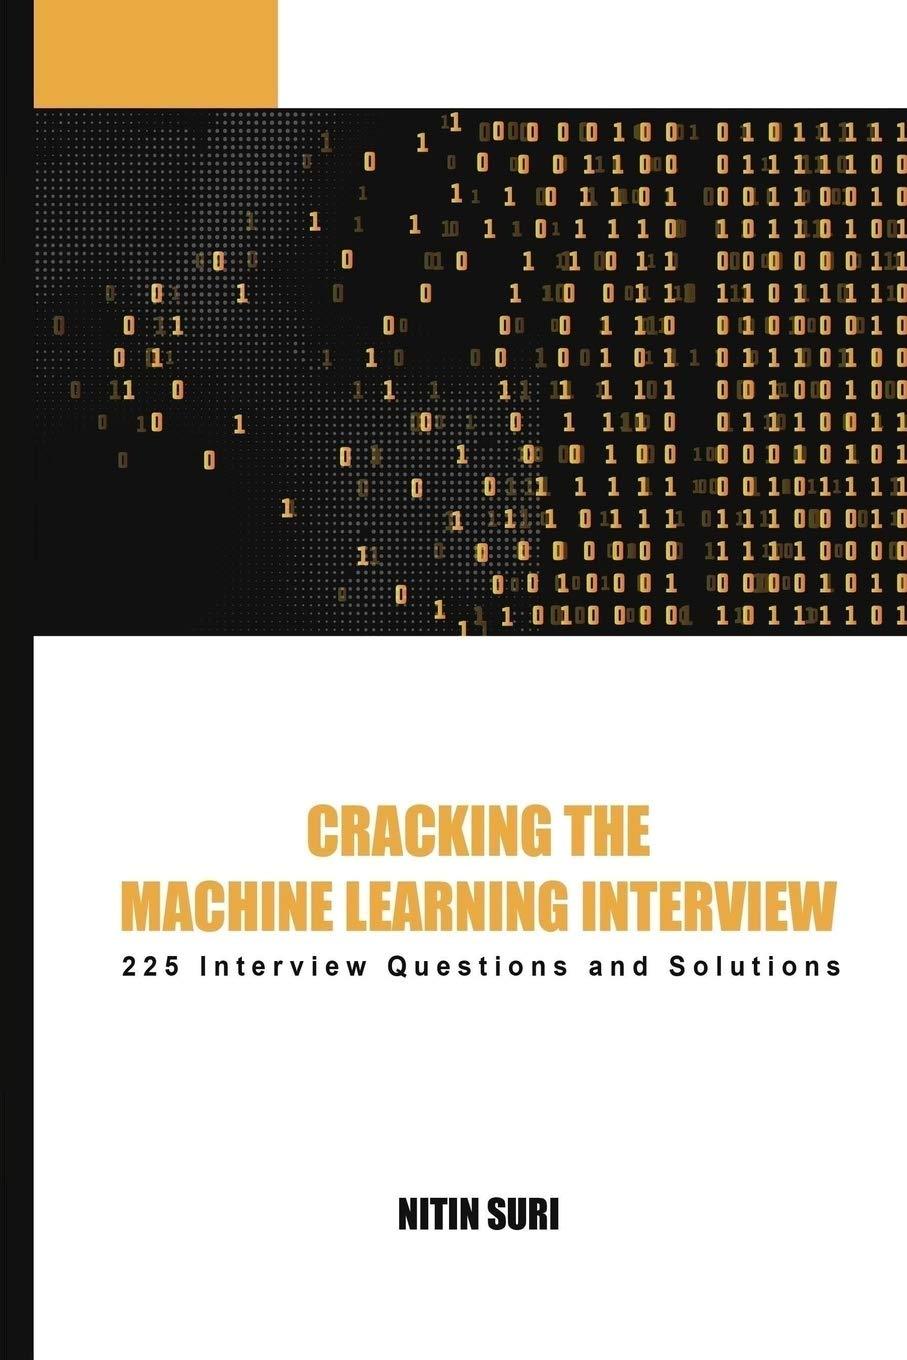 cracking the machine learning interview 1st edition nitin suri 1729223605, 978-1729223604